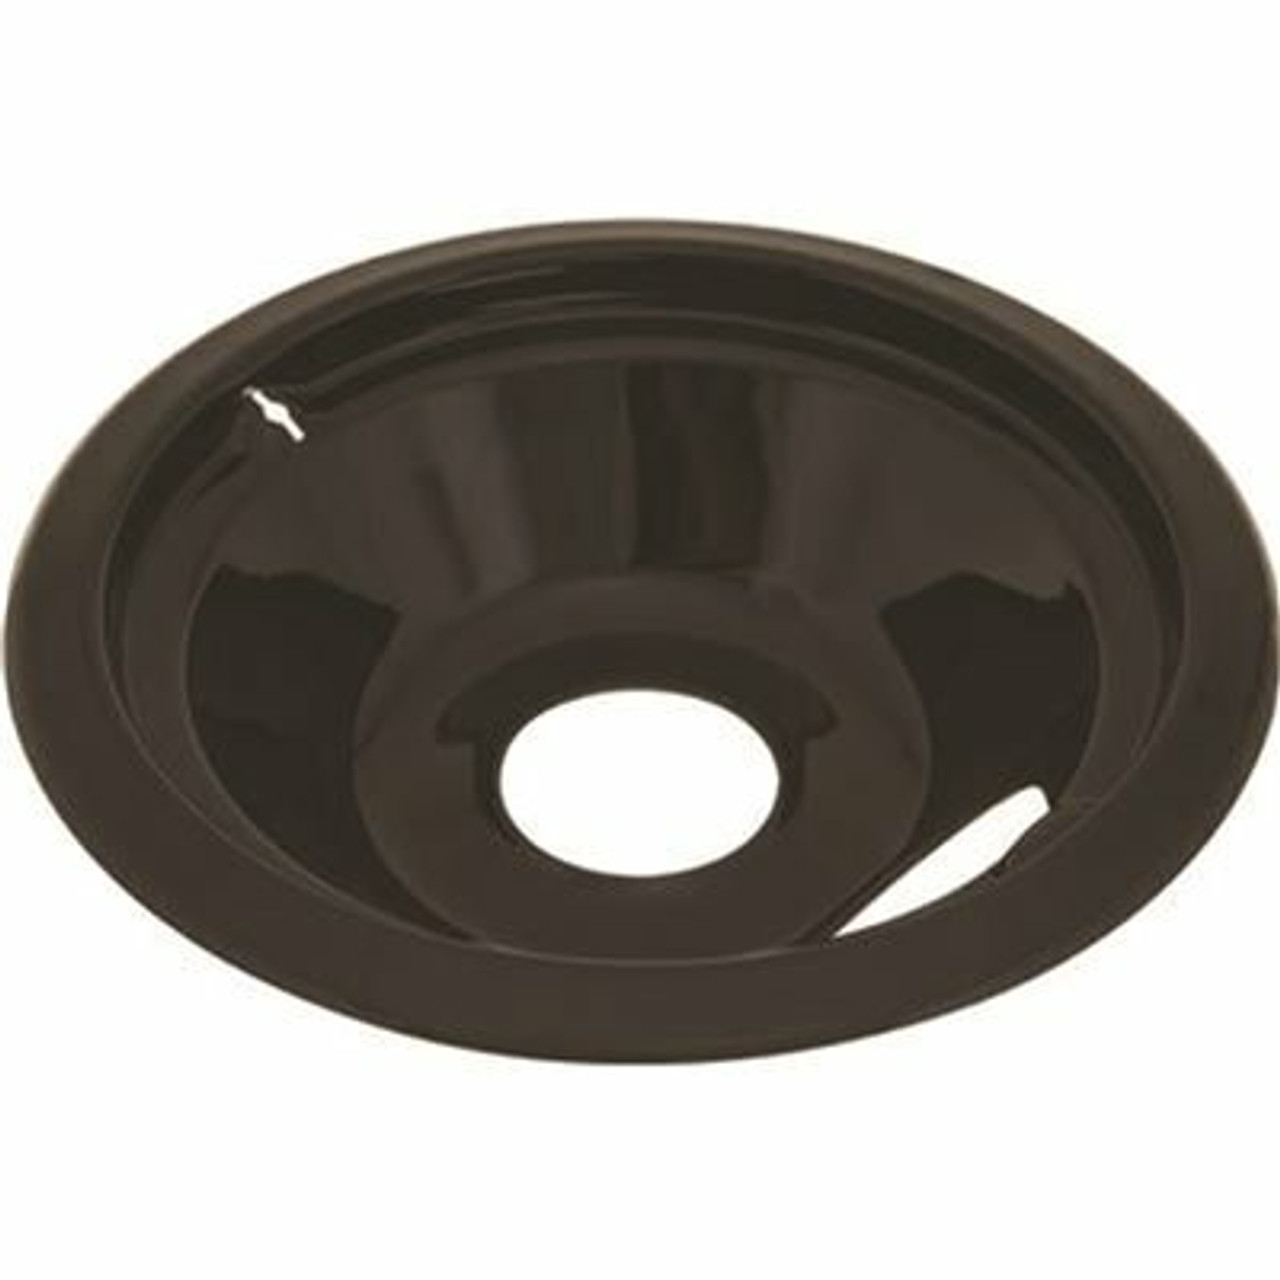 Porcelain-Coated Drip Pan For Ge And Hotpoint Electric Ranges In Black 6 in. (6-Pack)